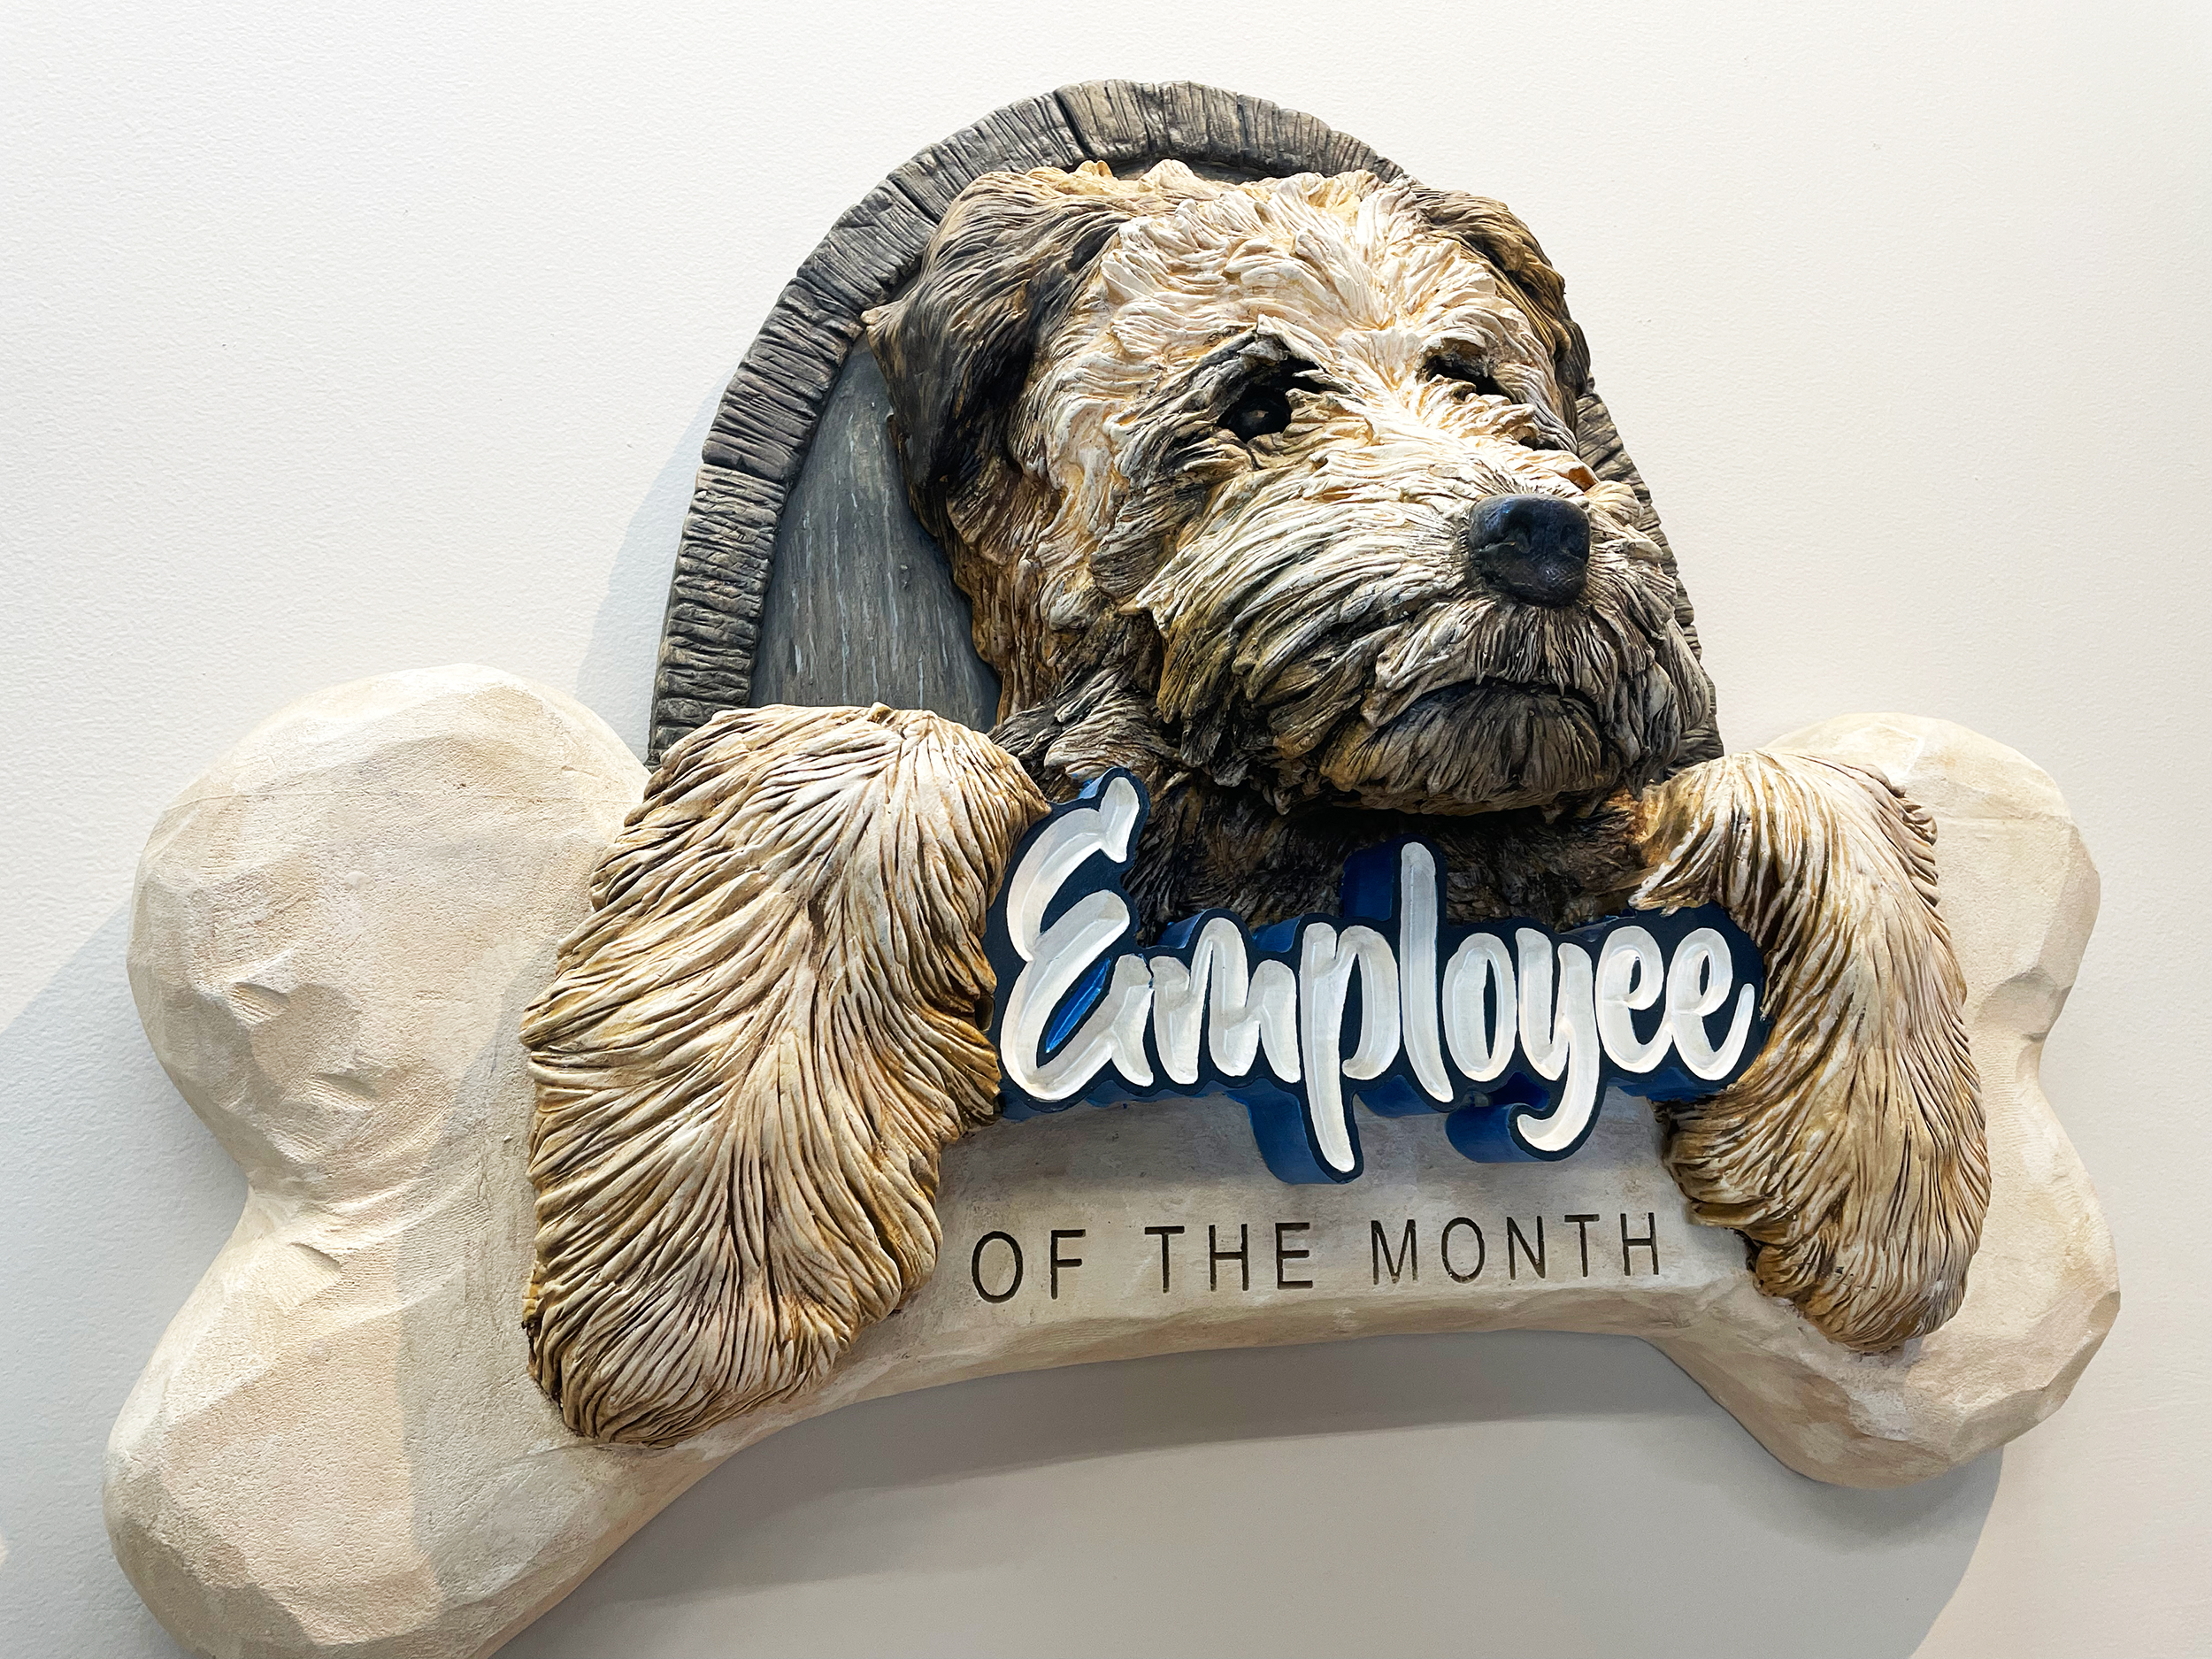 Employee of the month sign with 3D carved and sculpted dog and bone